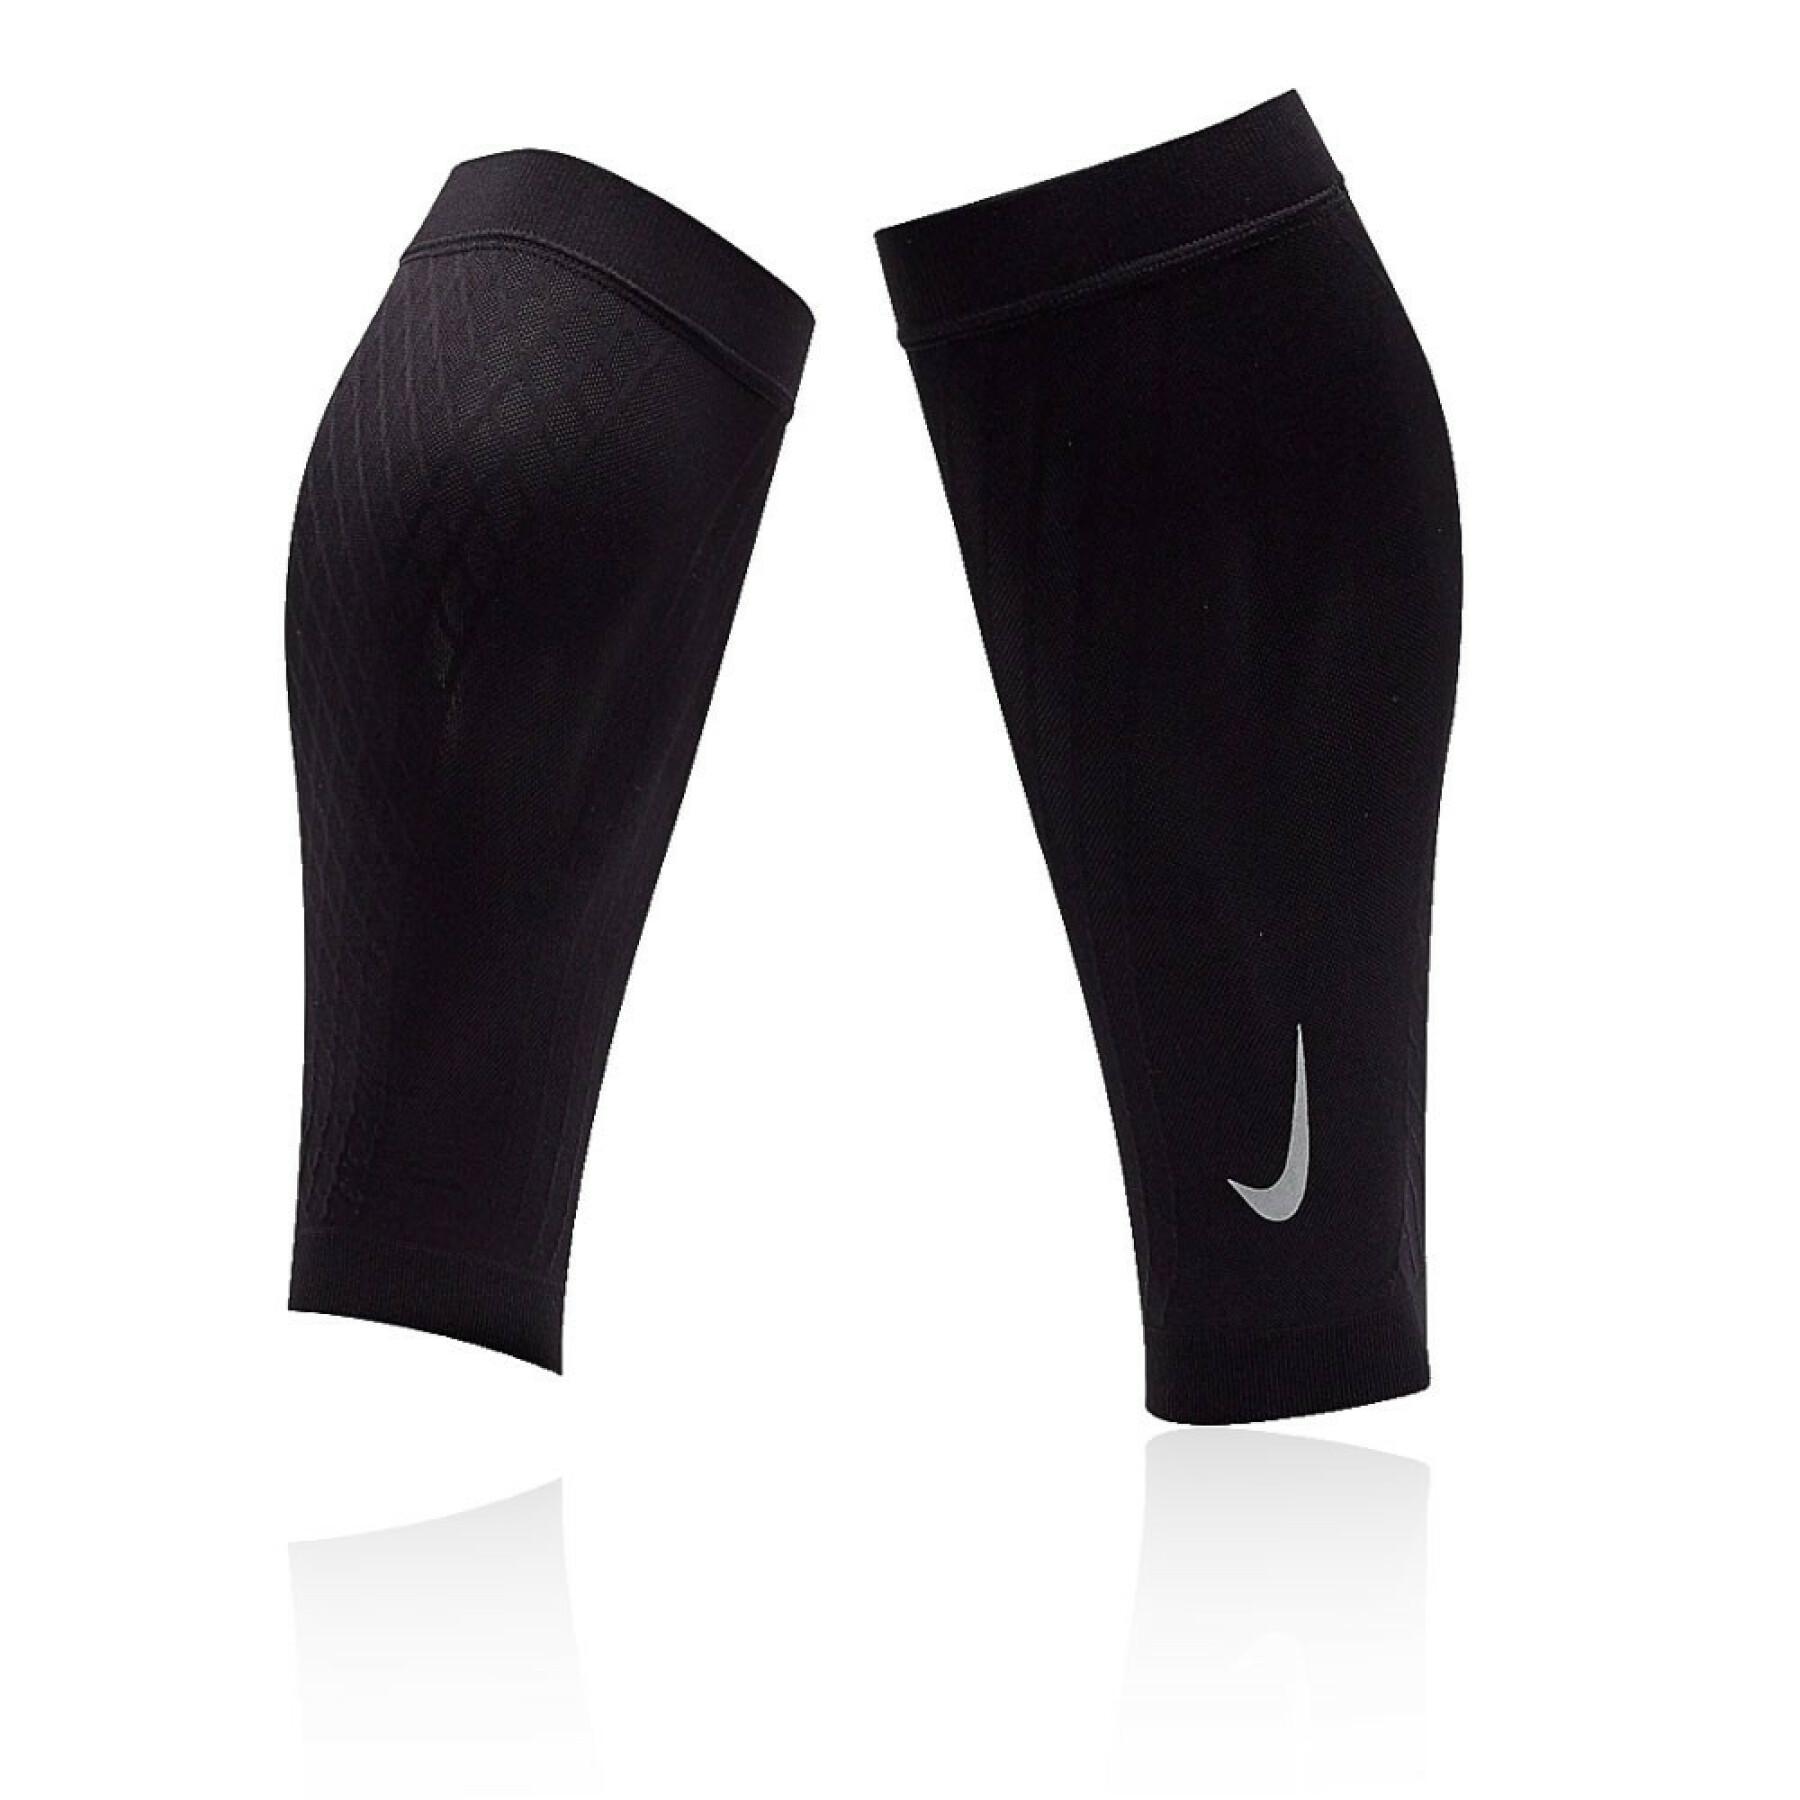 Nike Zoned Support Calf Sleeves 